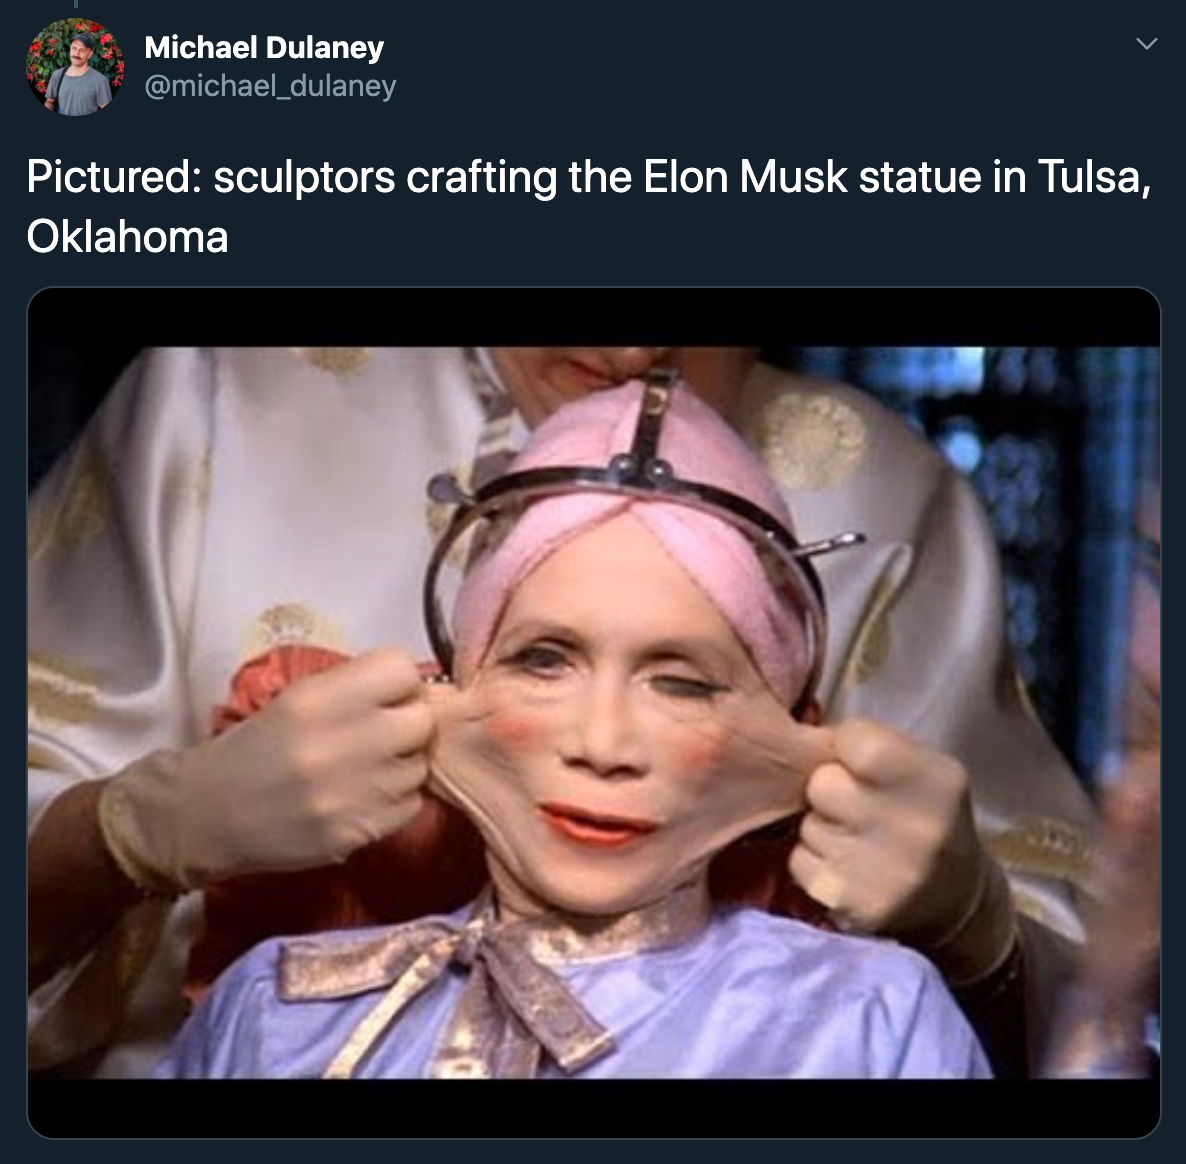 brazil terry gilliam 1985 - Pictured sculptors crafting the Elon Musk statue in Tulsa, Oklahoma